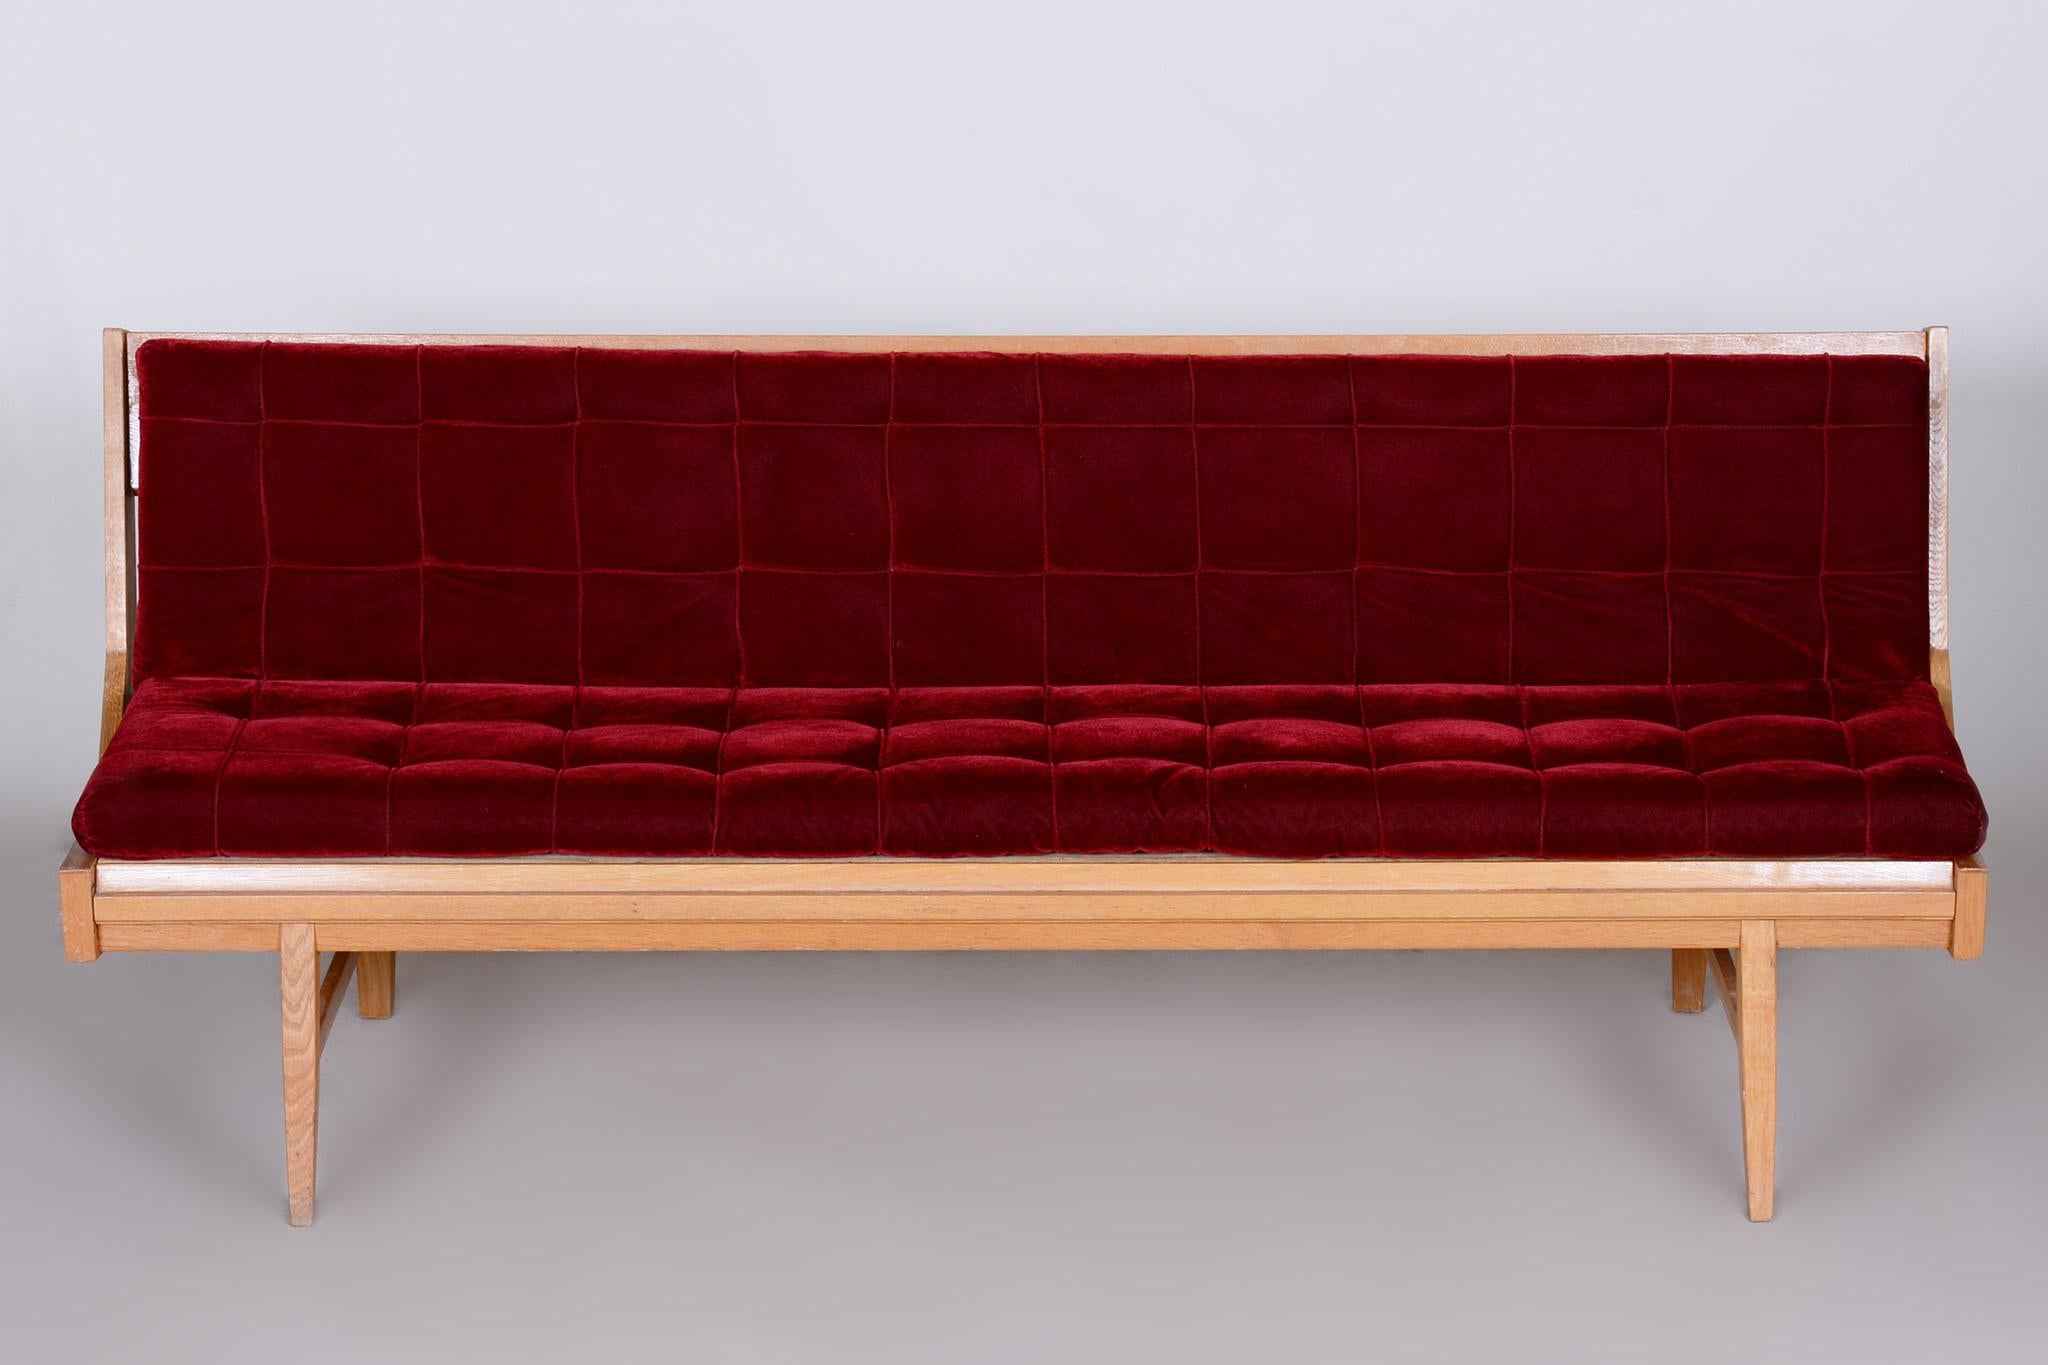 Czech Red Mid-Century Modern Oak Sofa, 1950s, Original Well Preserved Upholstery For Sale